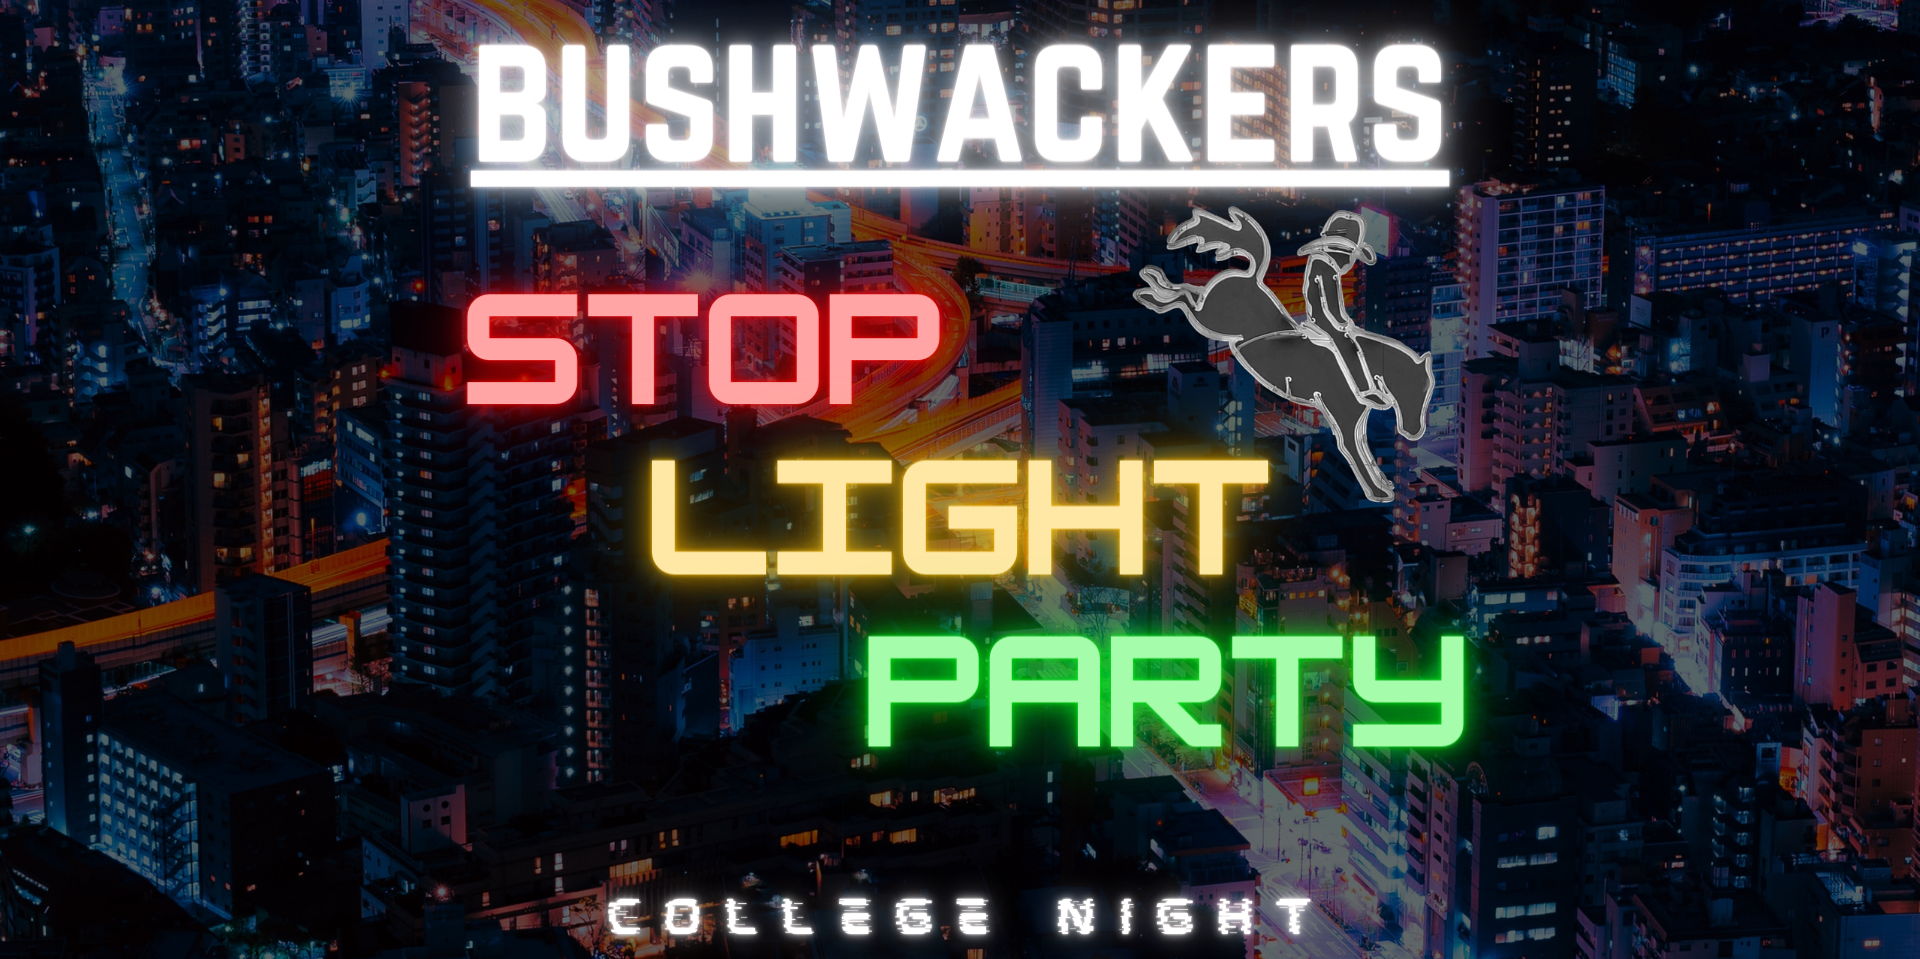 Stop Light Party at Bushwackers! promotional image